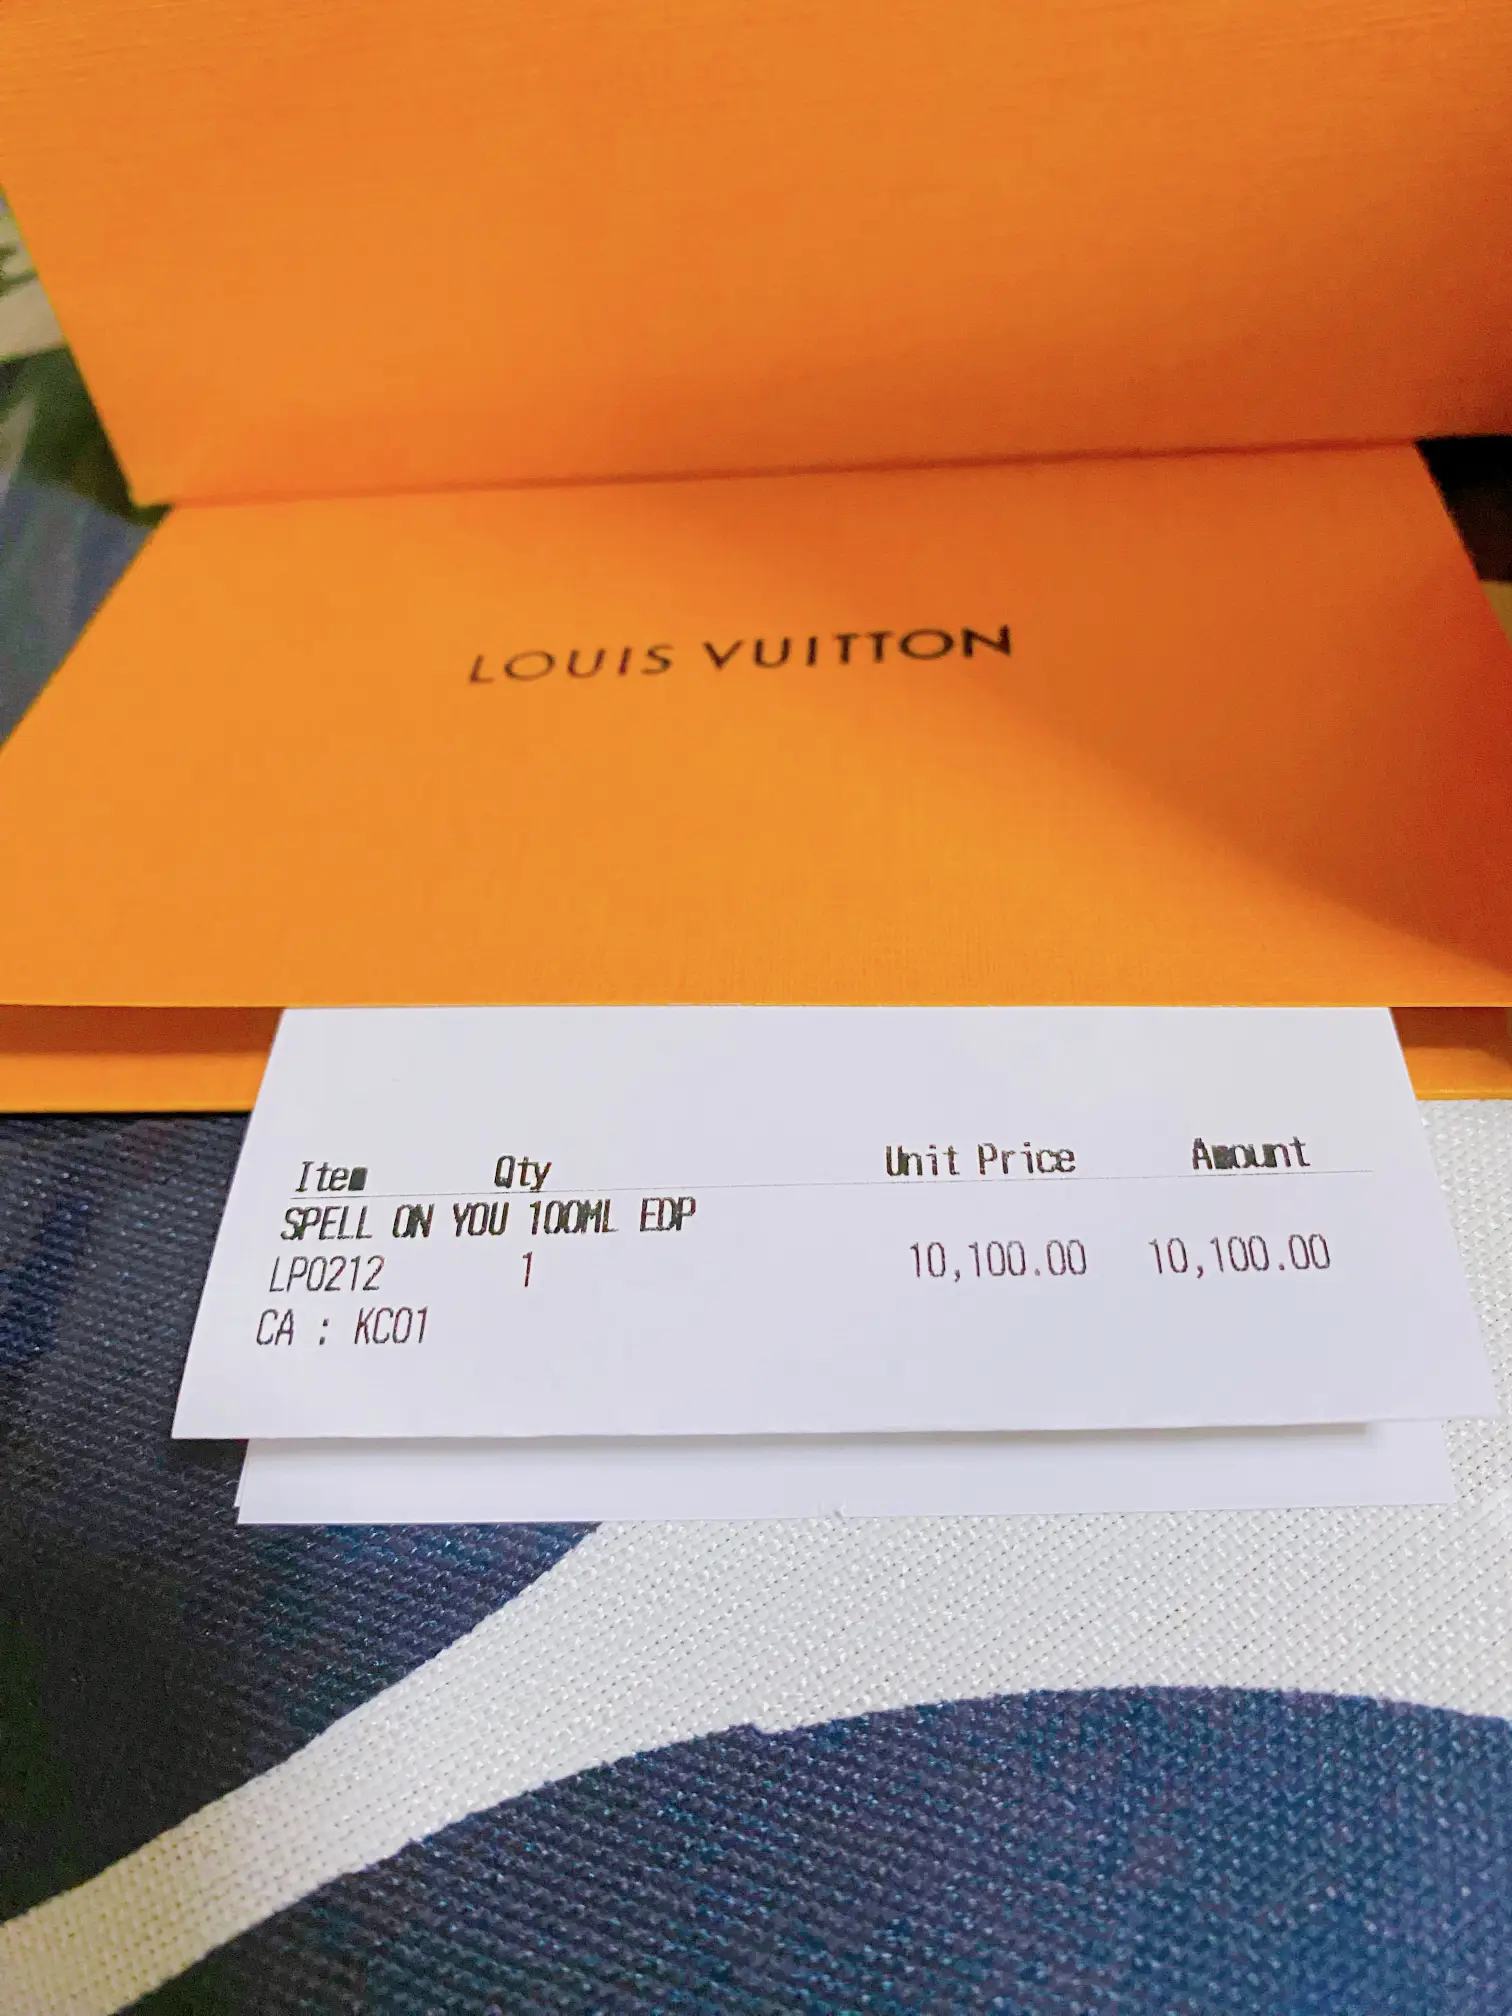 spell on you louis vuitton price